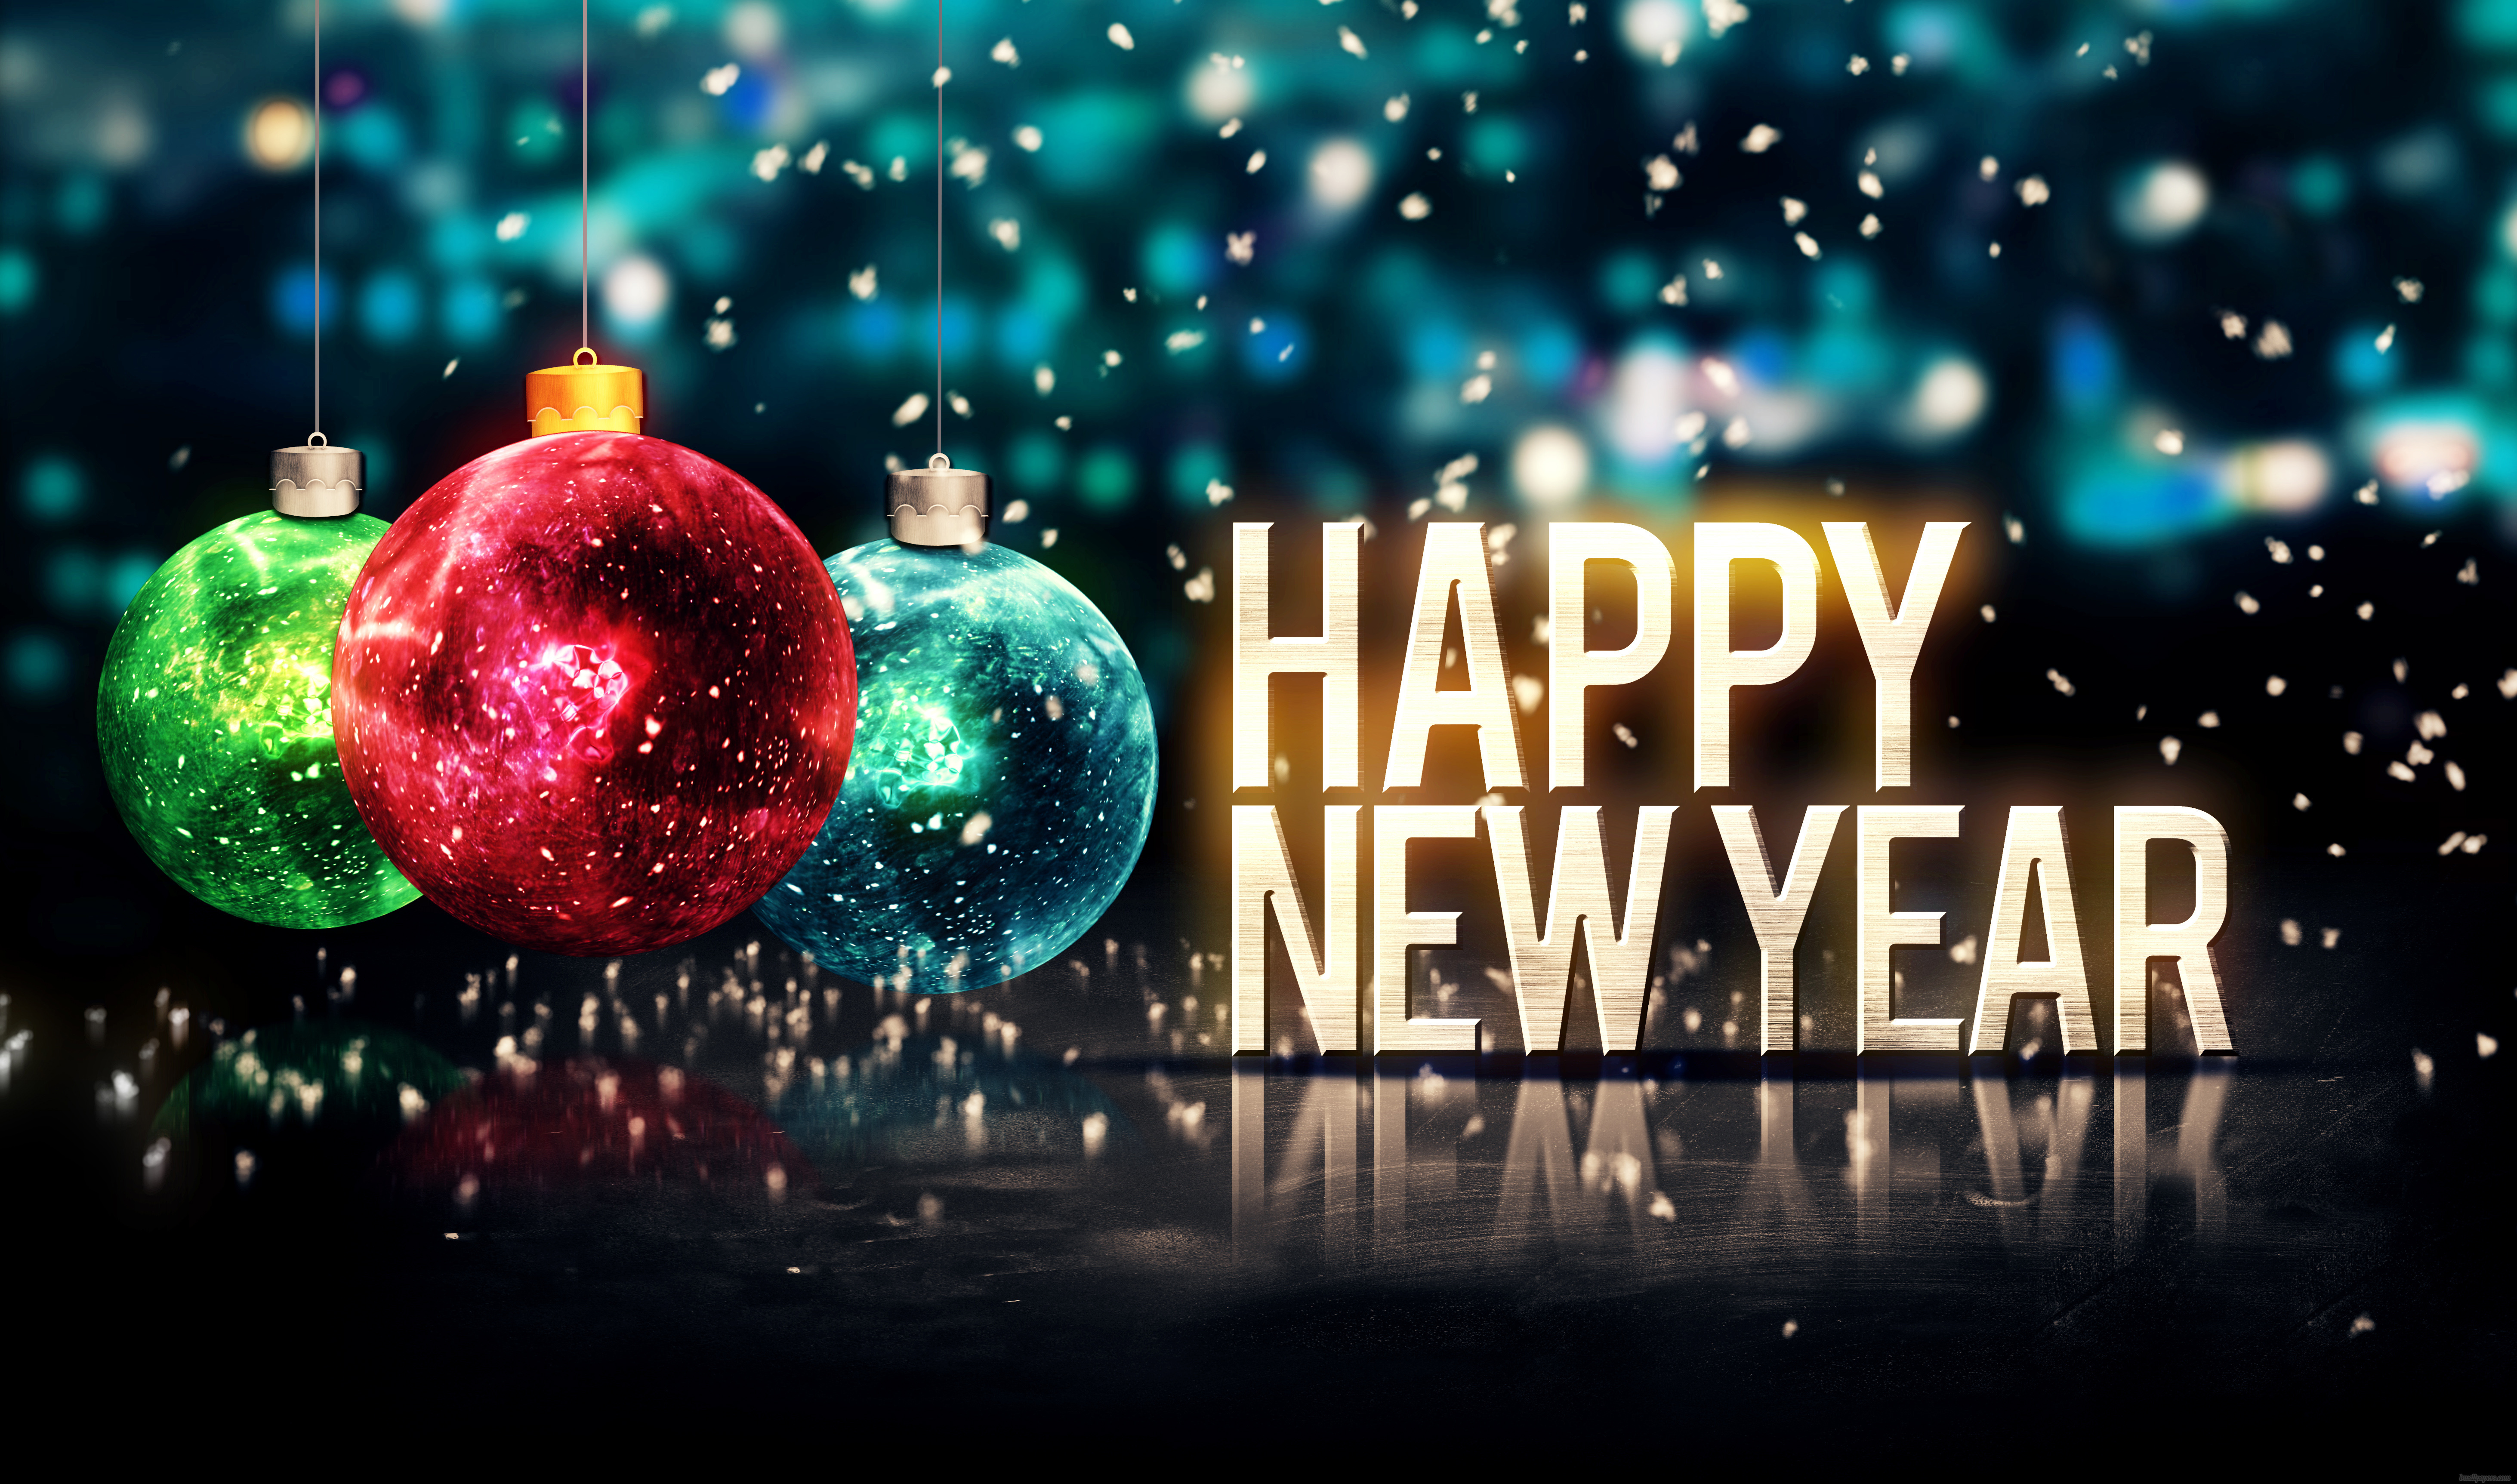 Happy New Year 2016 Wallpaper   Wallpaper High Definition High